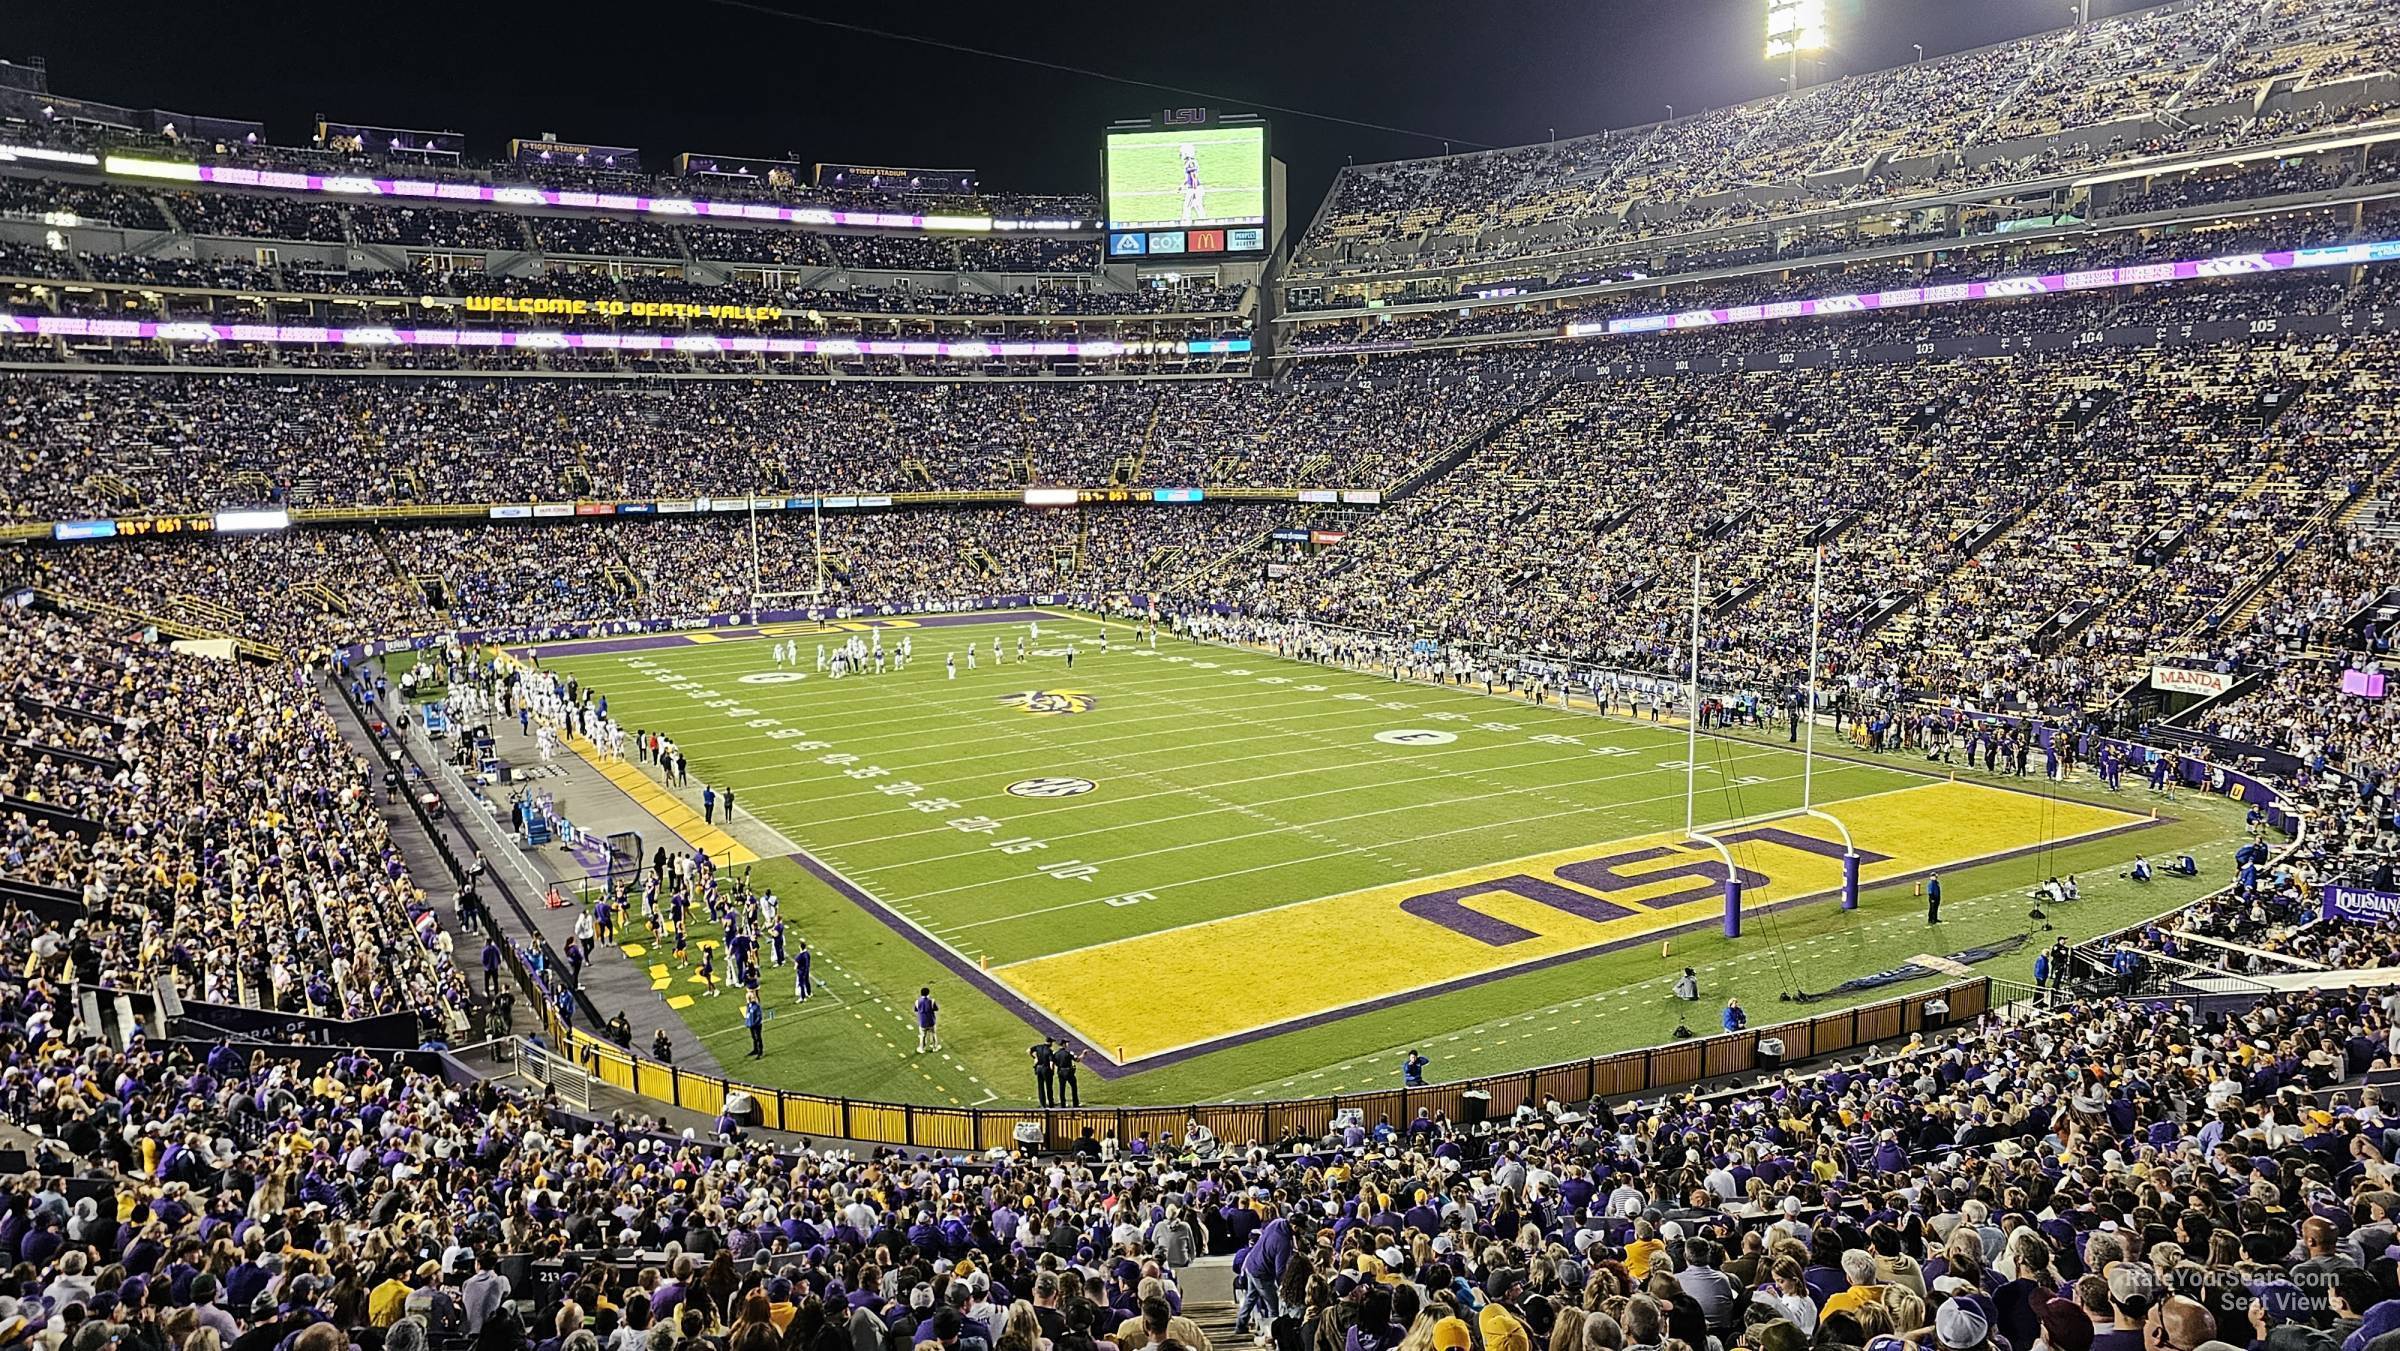 section 238, row 1 seat view  - tiger stadium